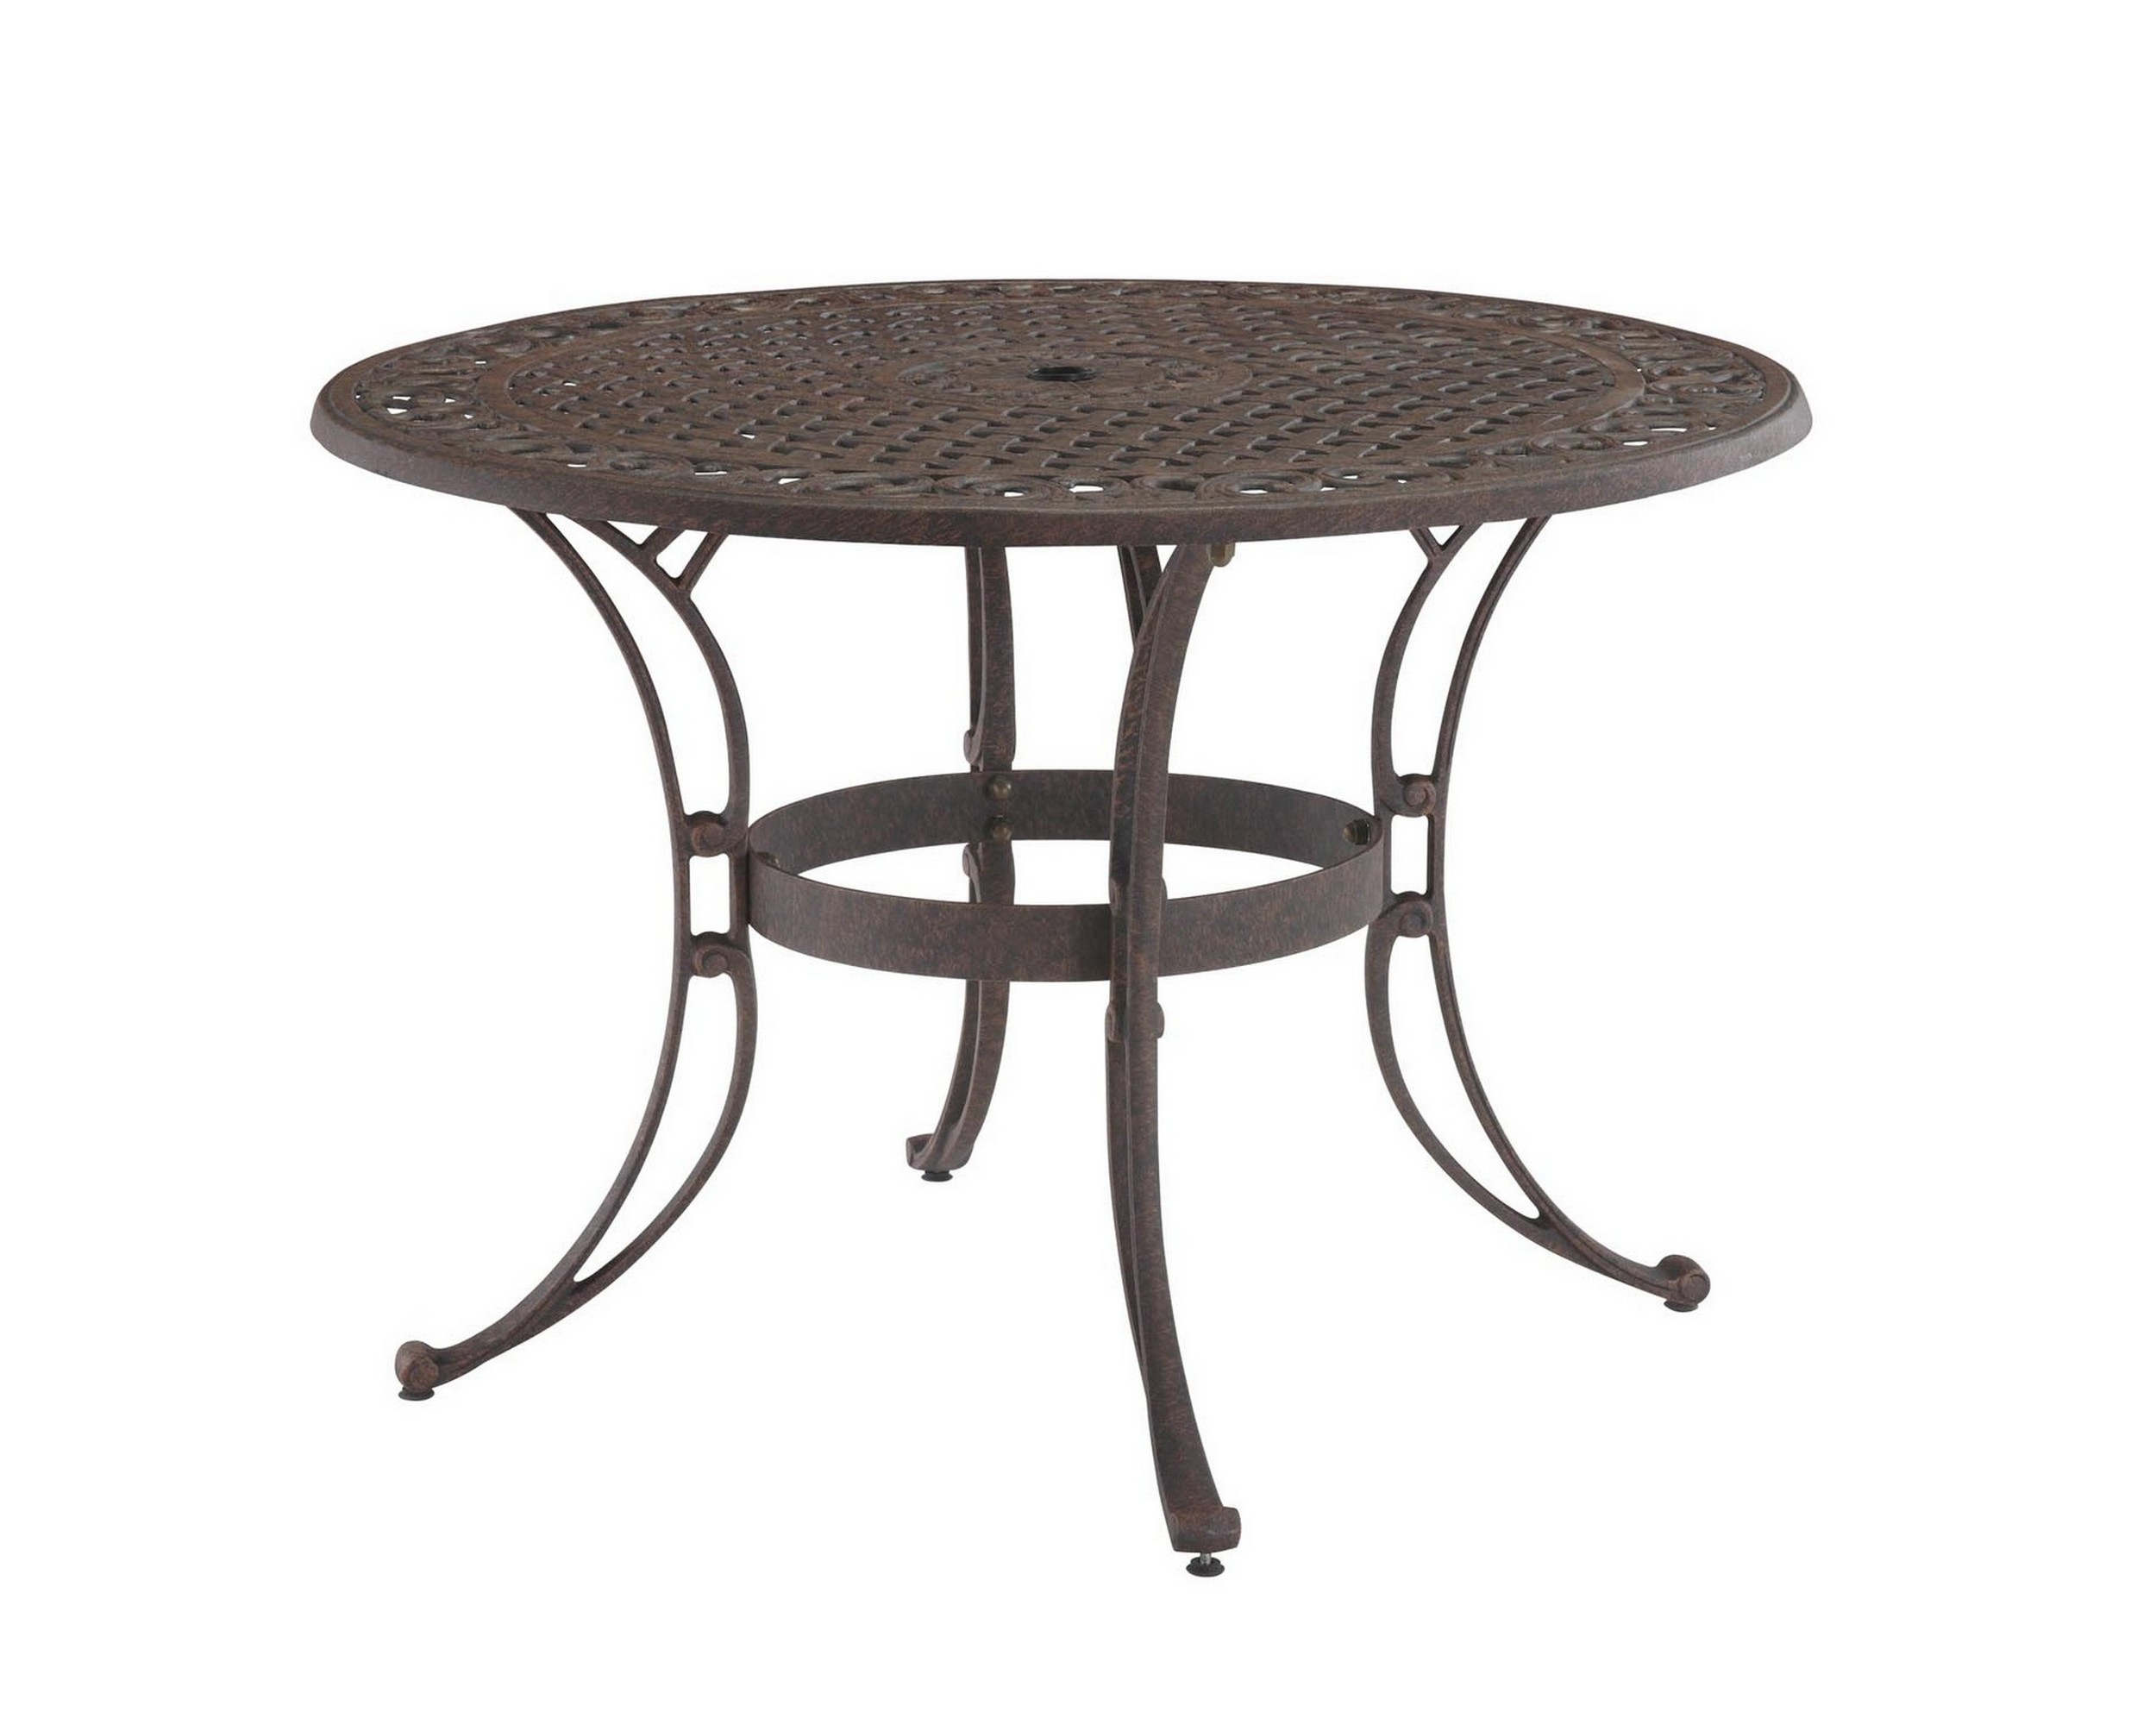 Home styles biscayne bronze outdoor dining table 42 inch